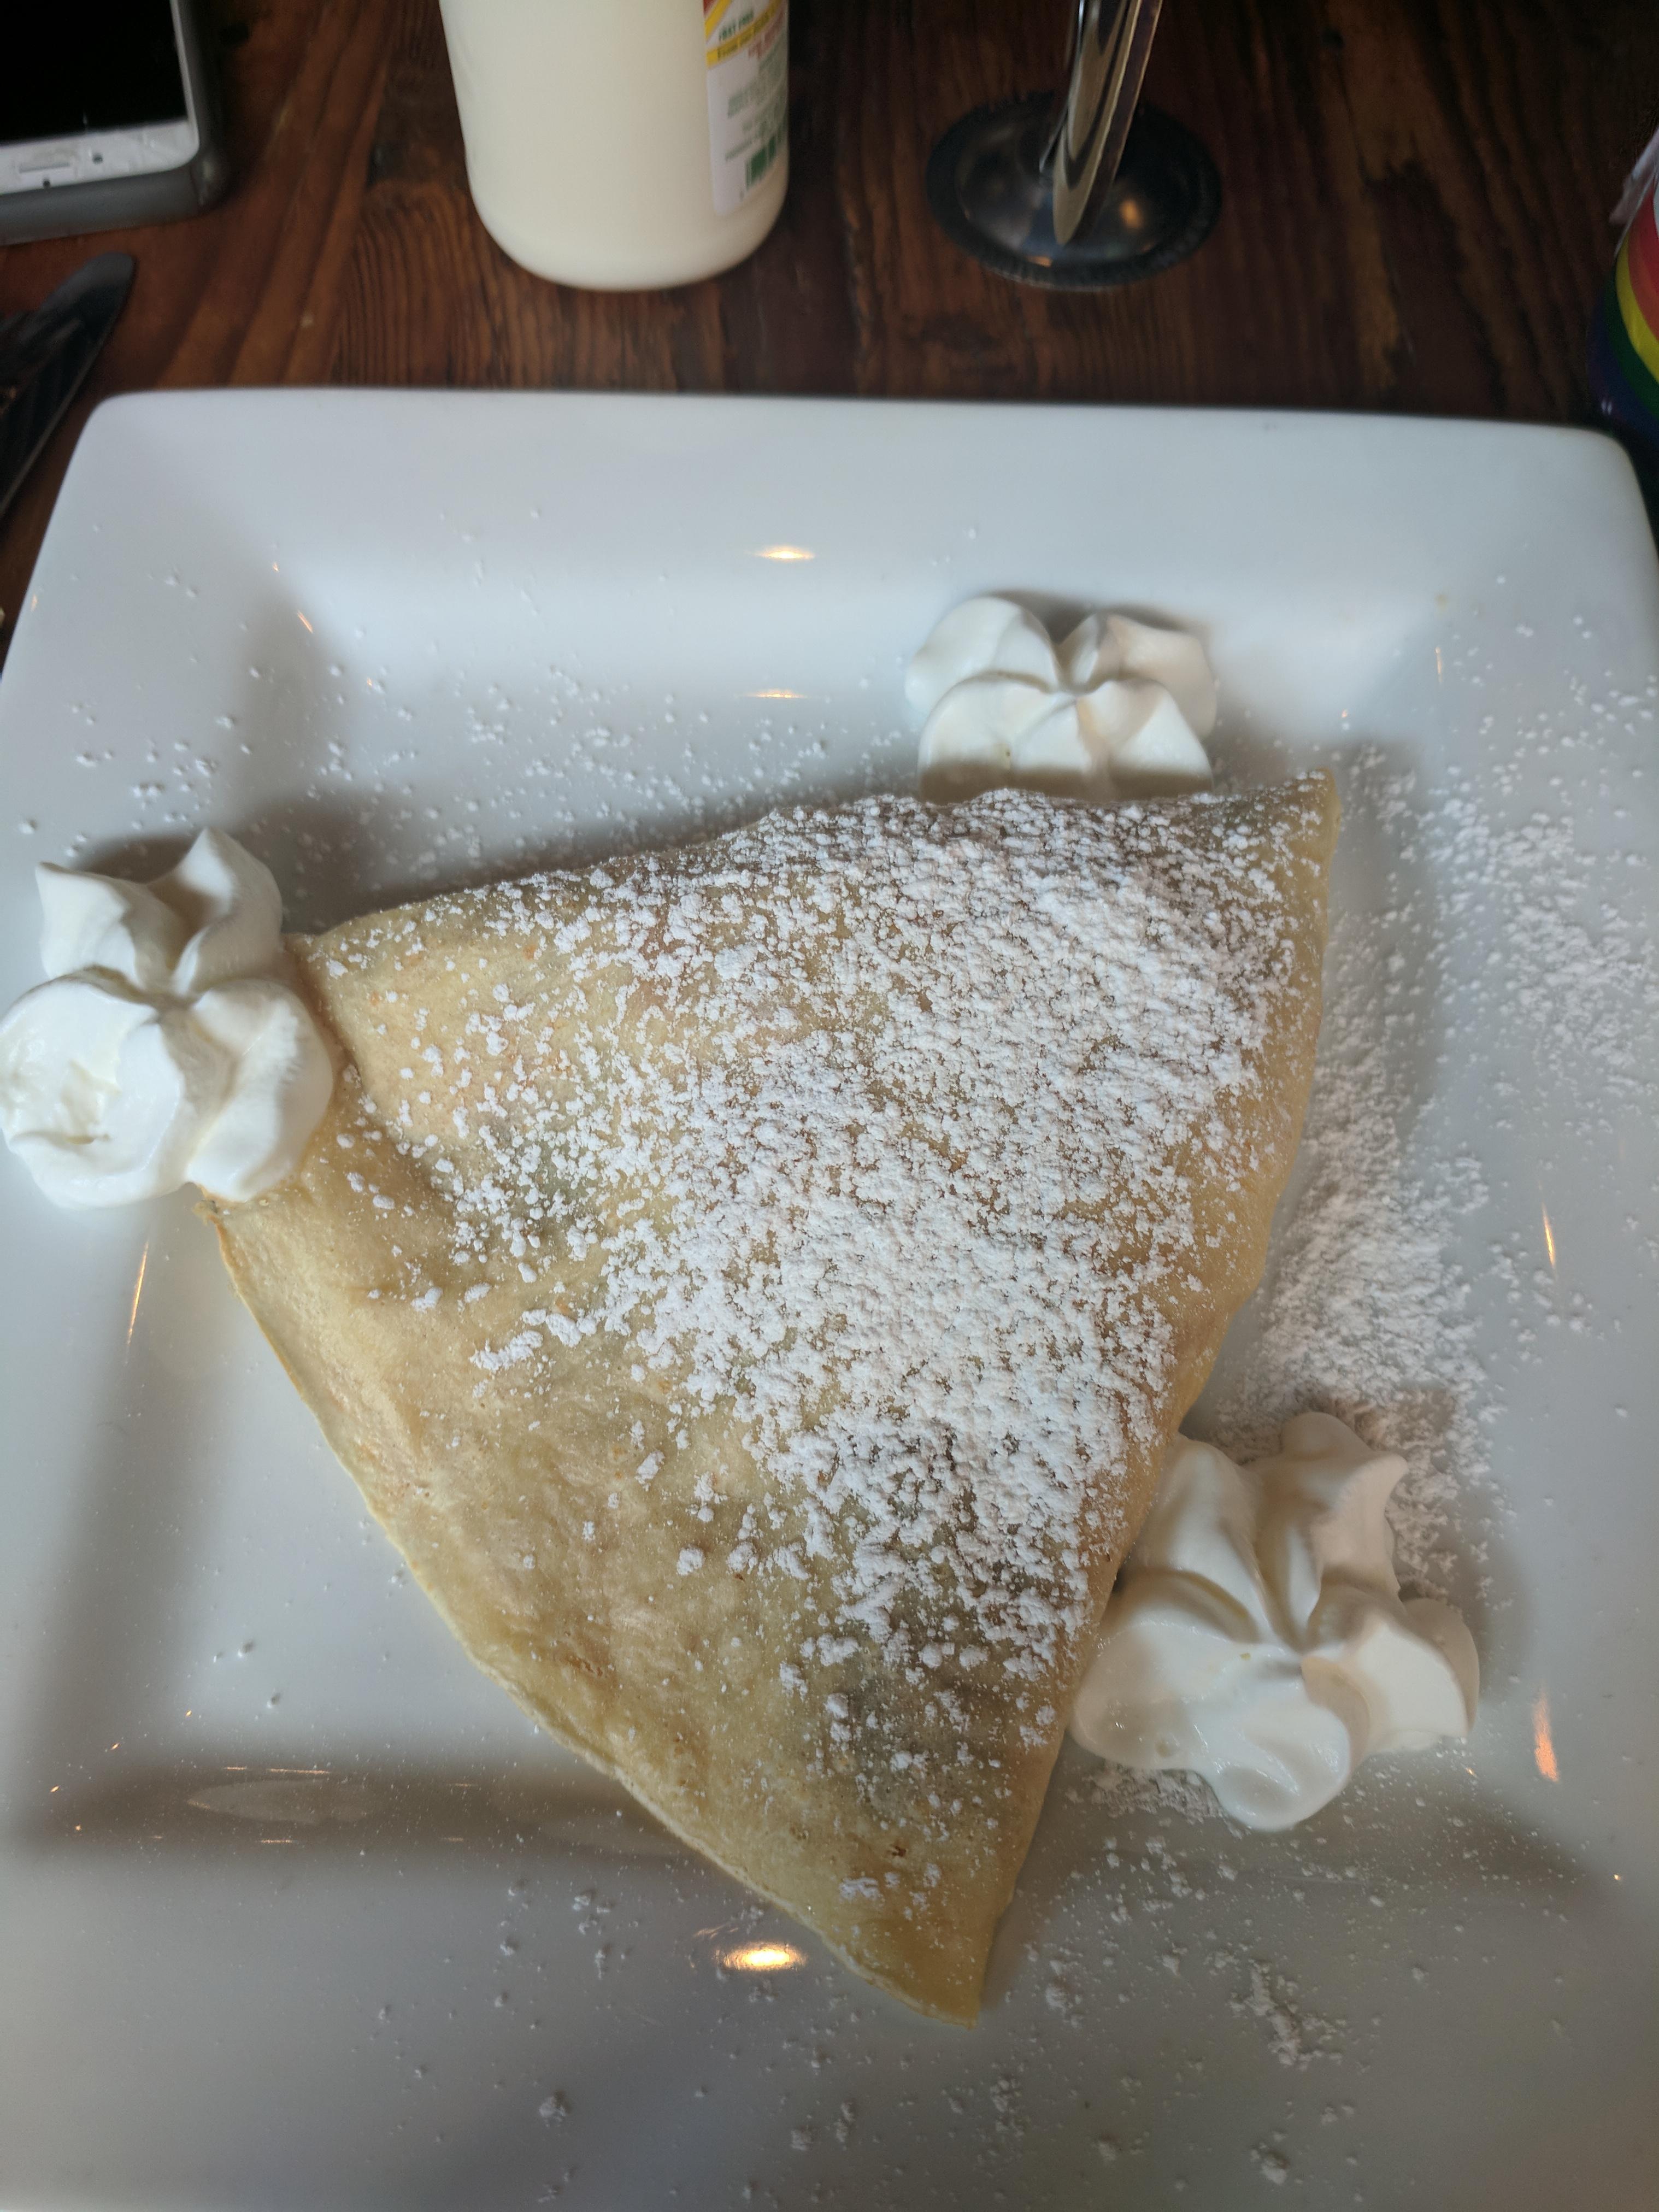 The Chocomonkey ! Crepe filled with Nutella and bananas with whipped ...